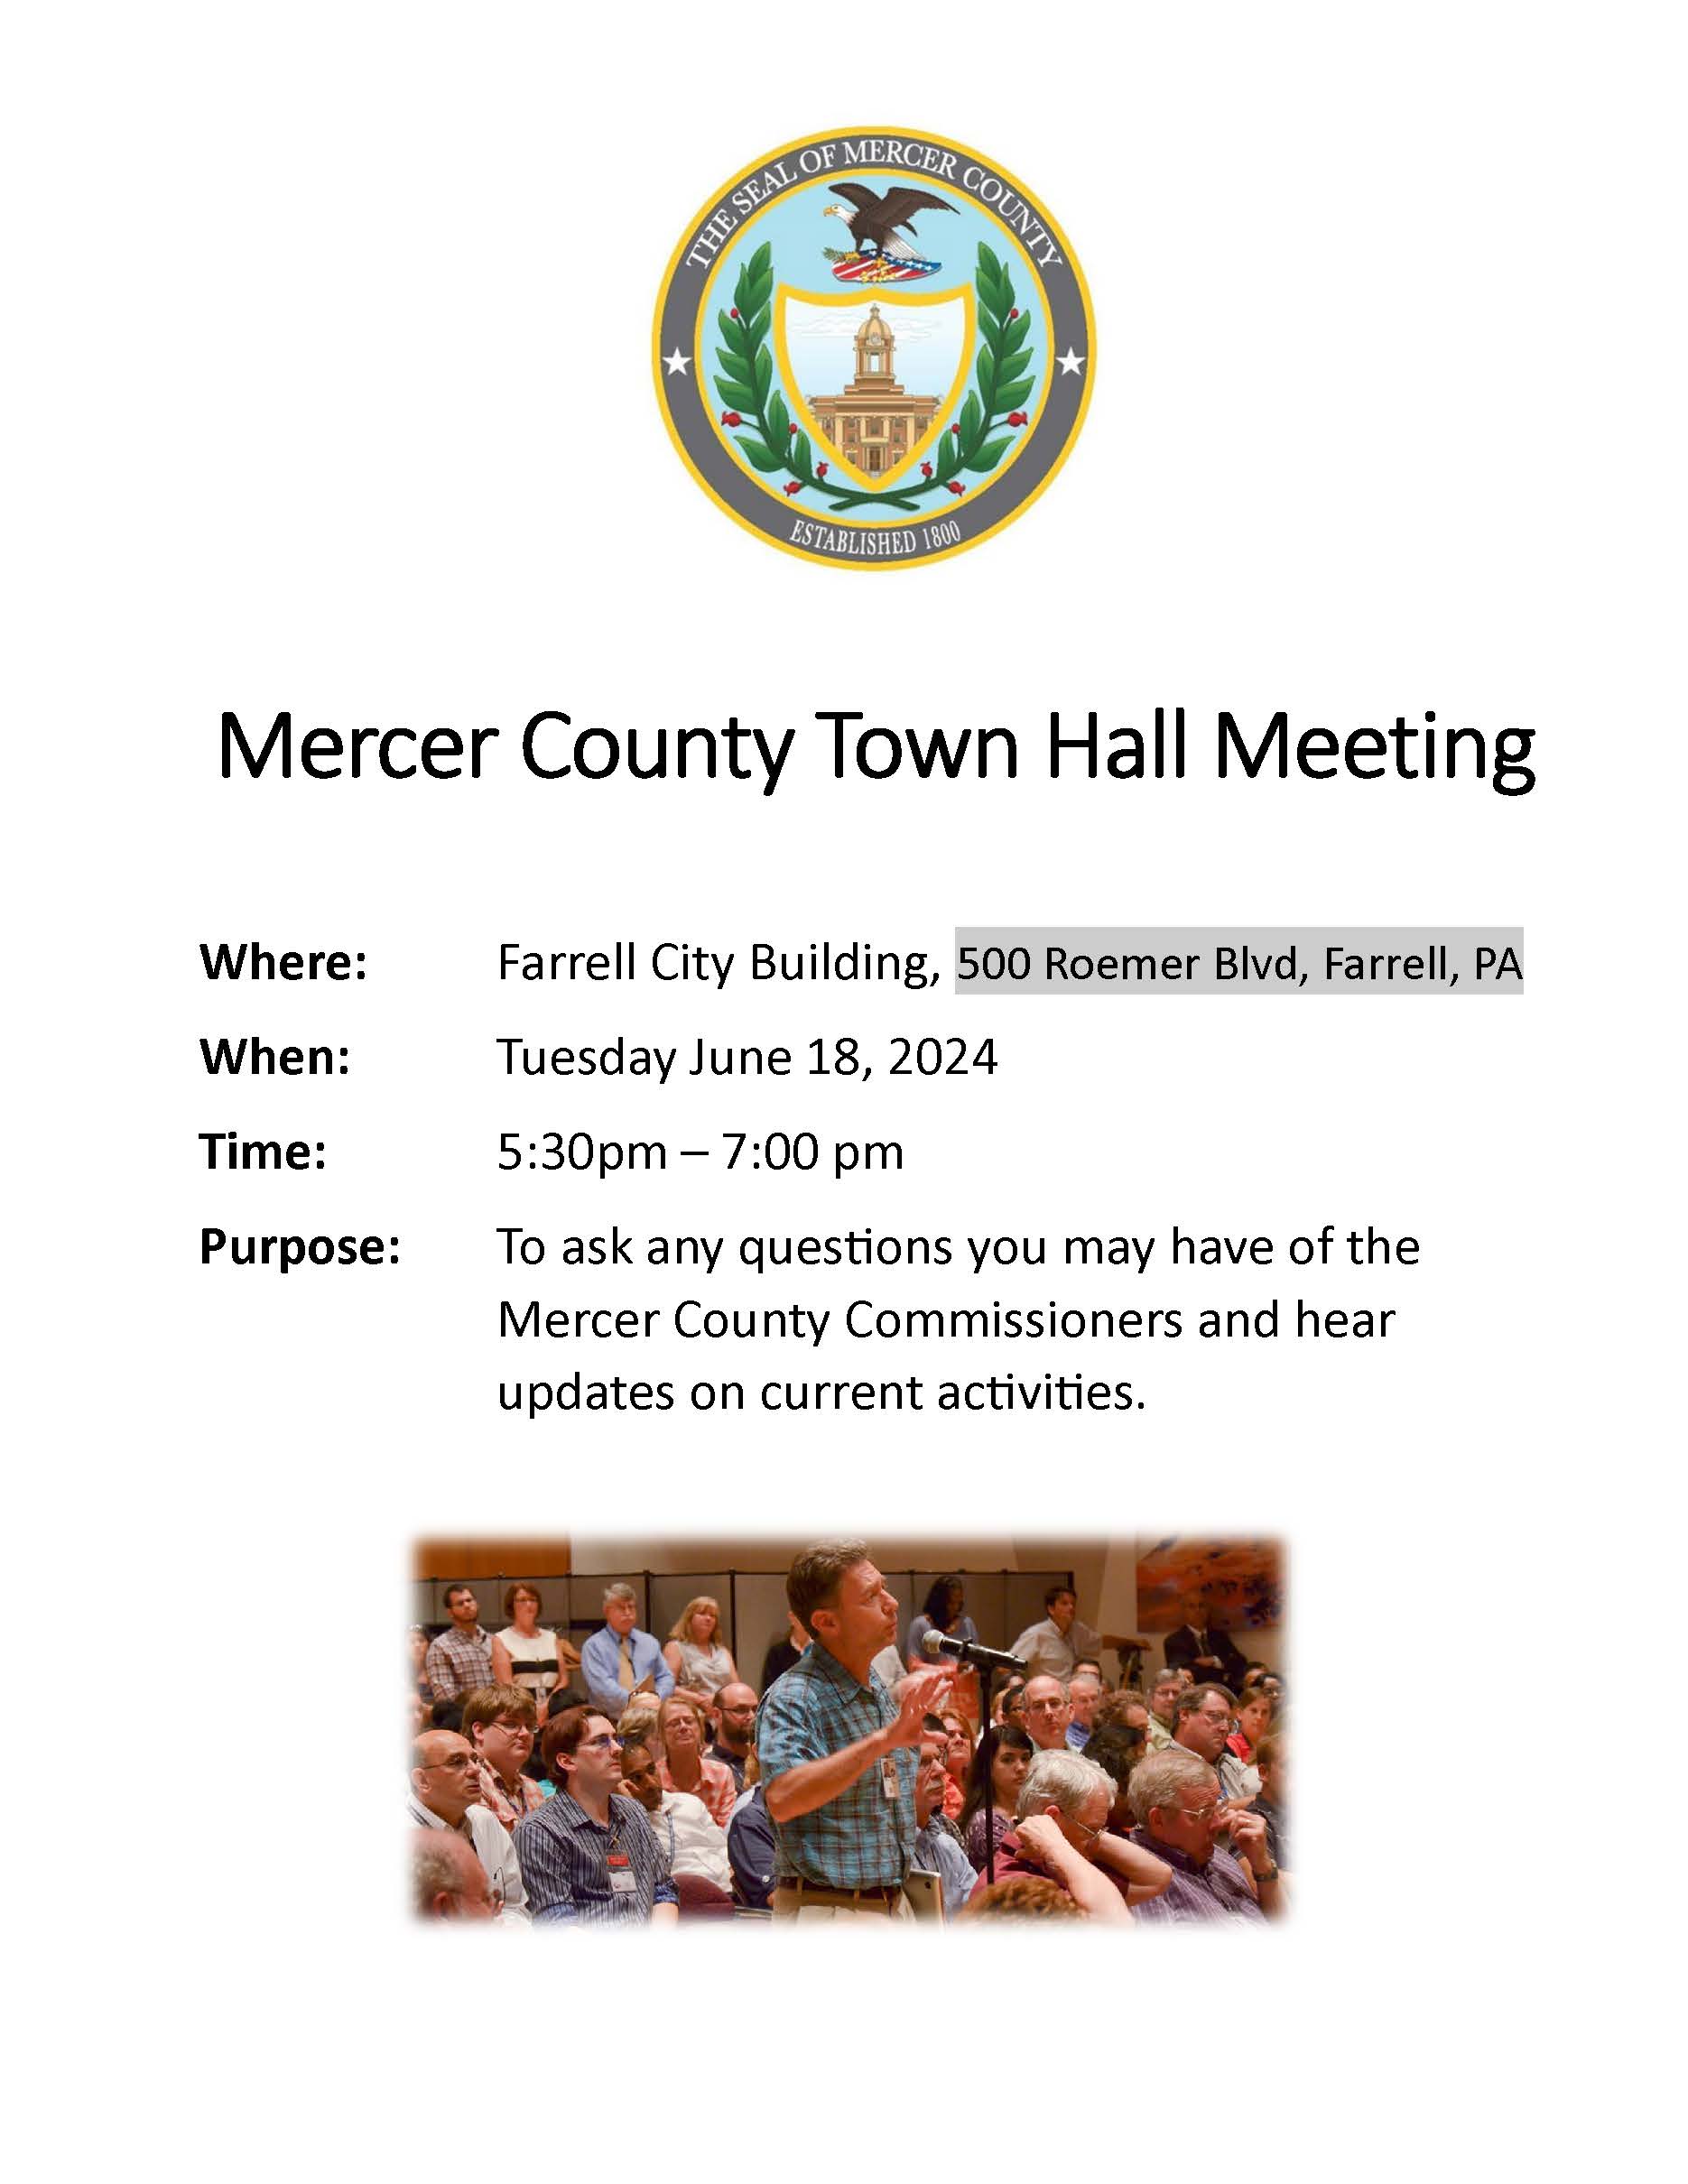 Mercer County Town Hall Meeting Flyer